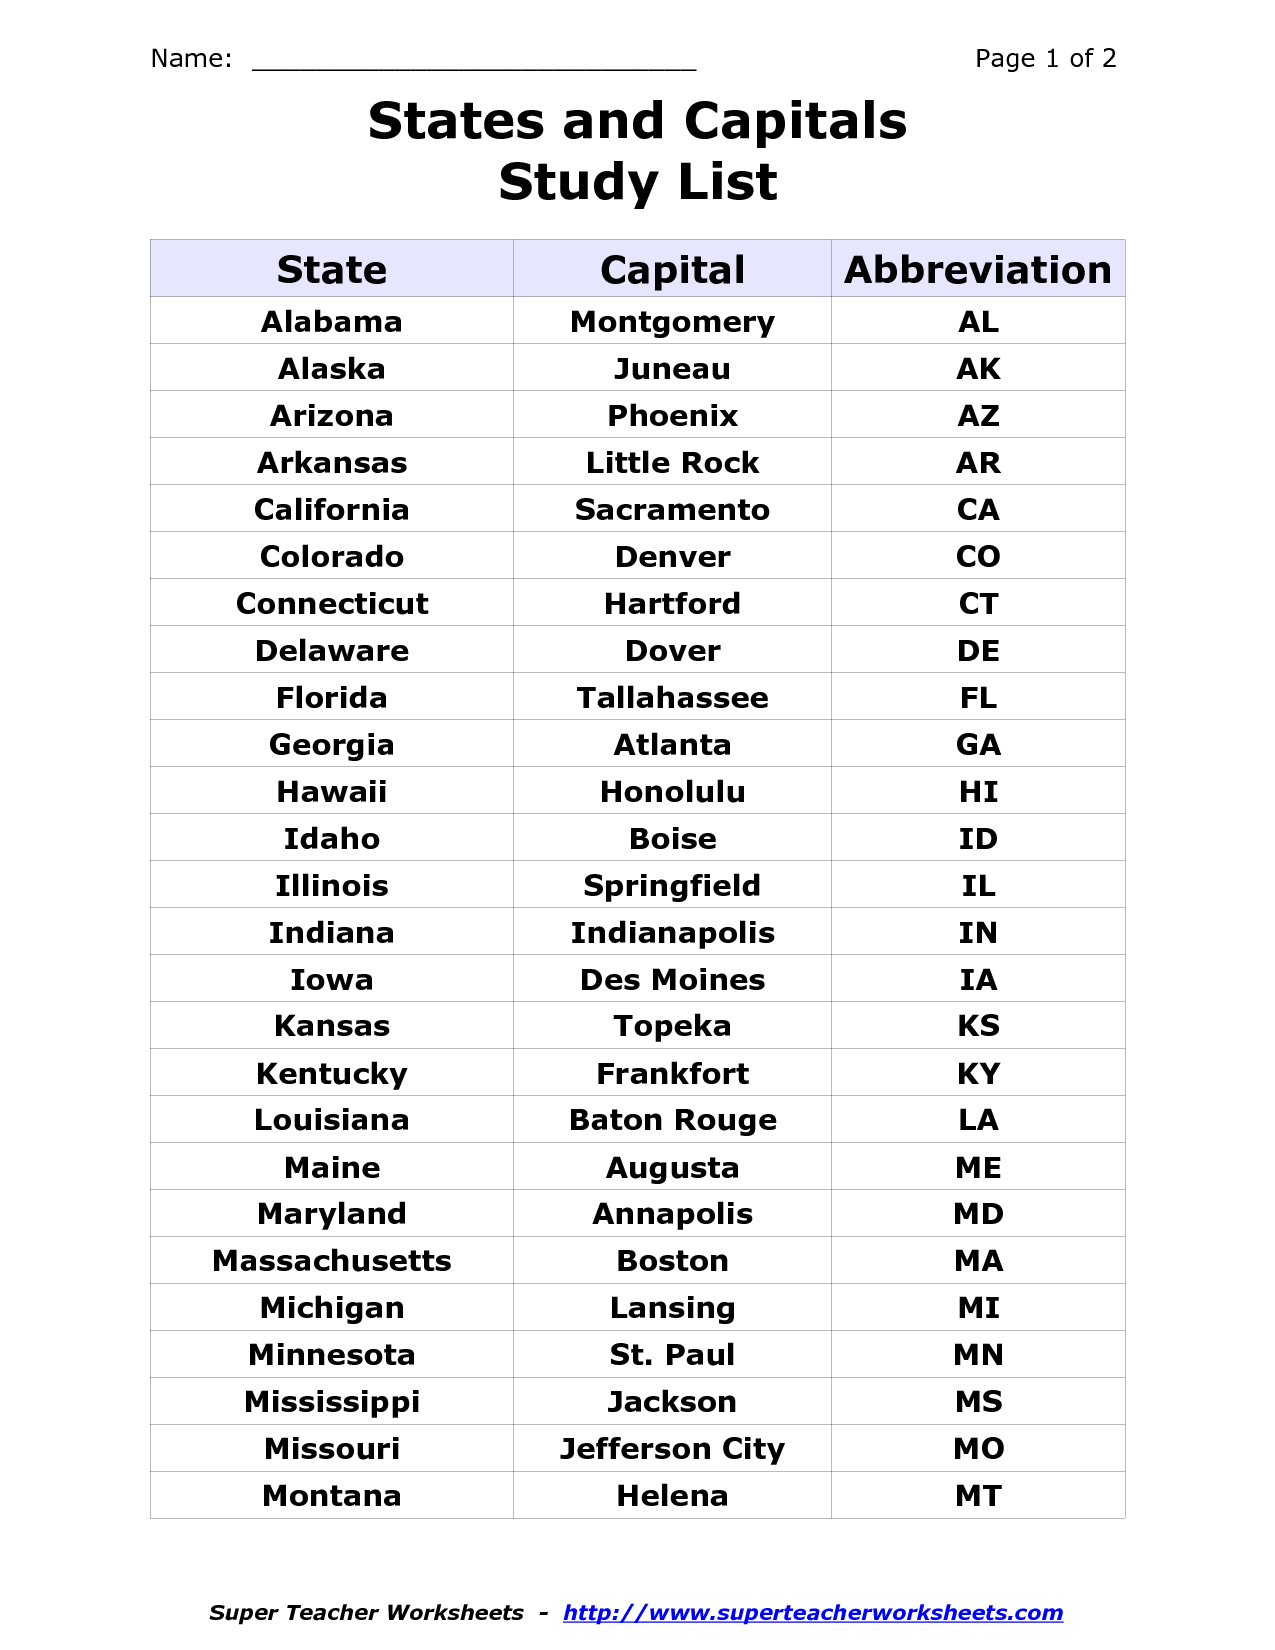 List Of States And Capitals And Abbreviations - Google Search | Us States And Capitals Printable Worksheets